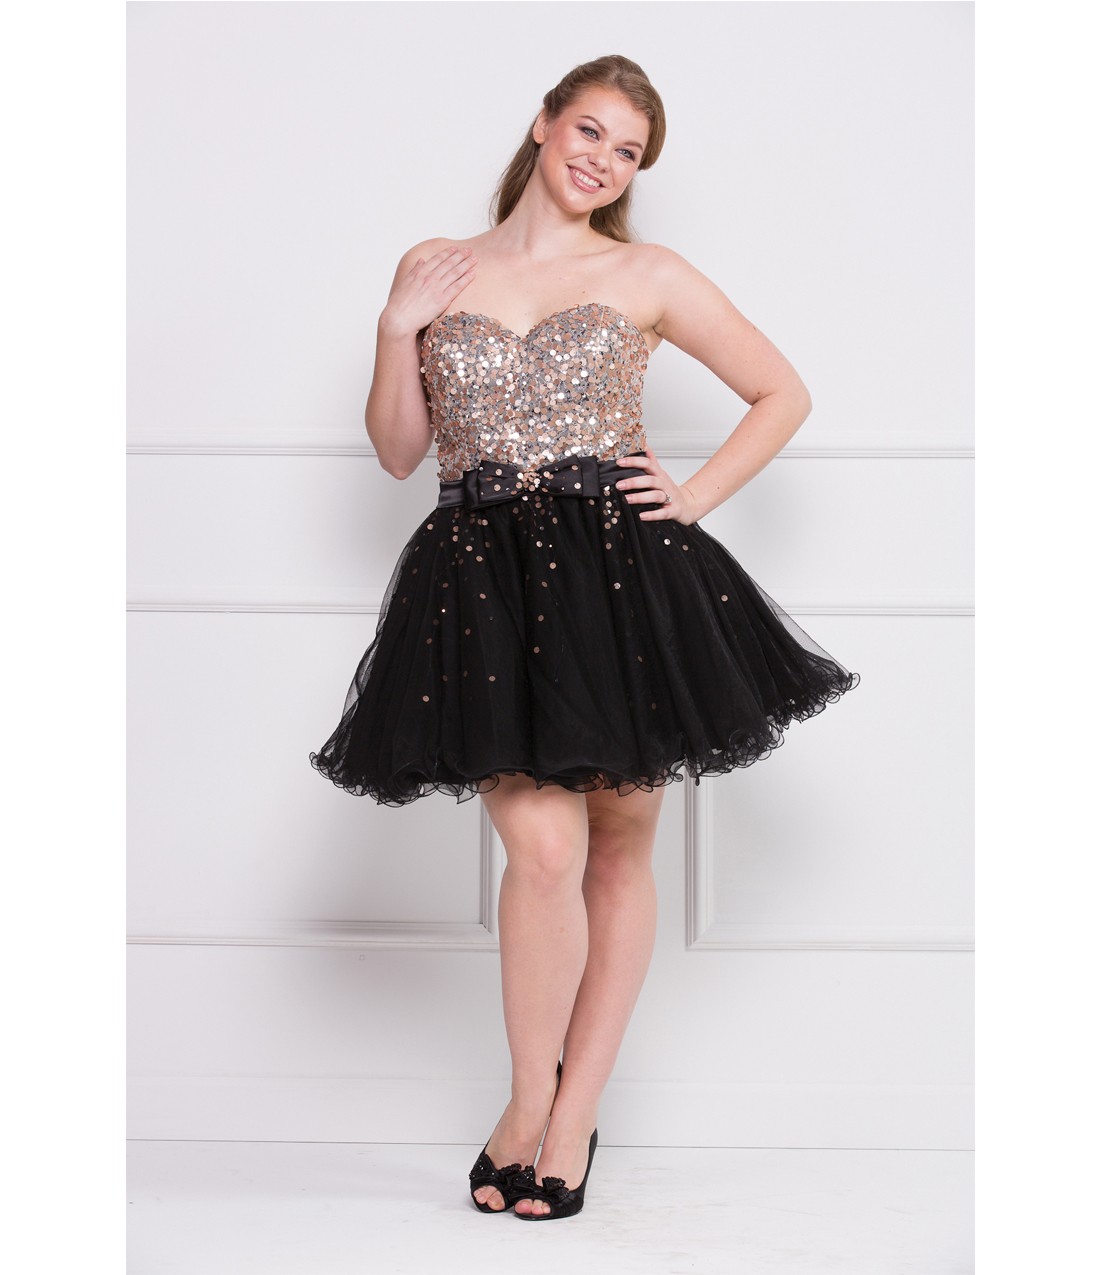 Black Strapless Sequin Dress - New Fashion Collection